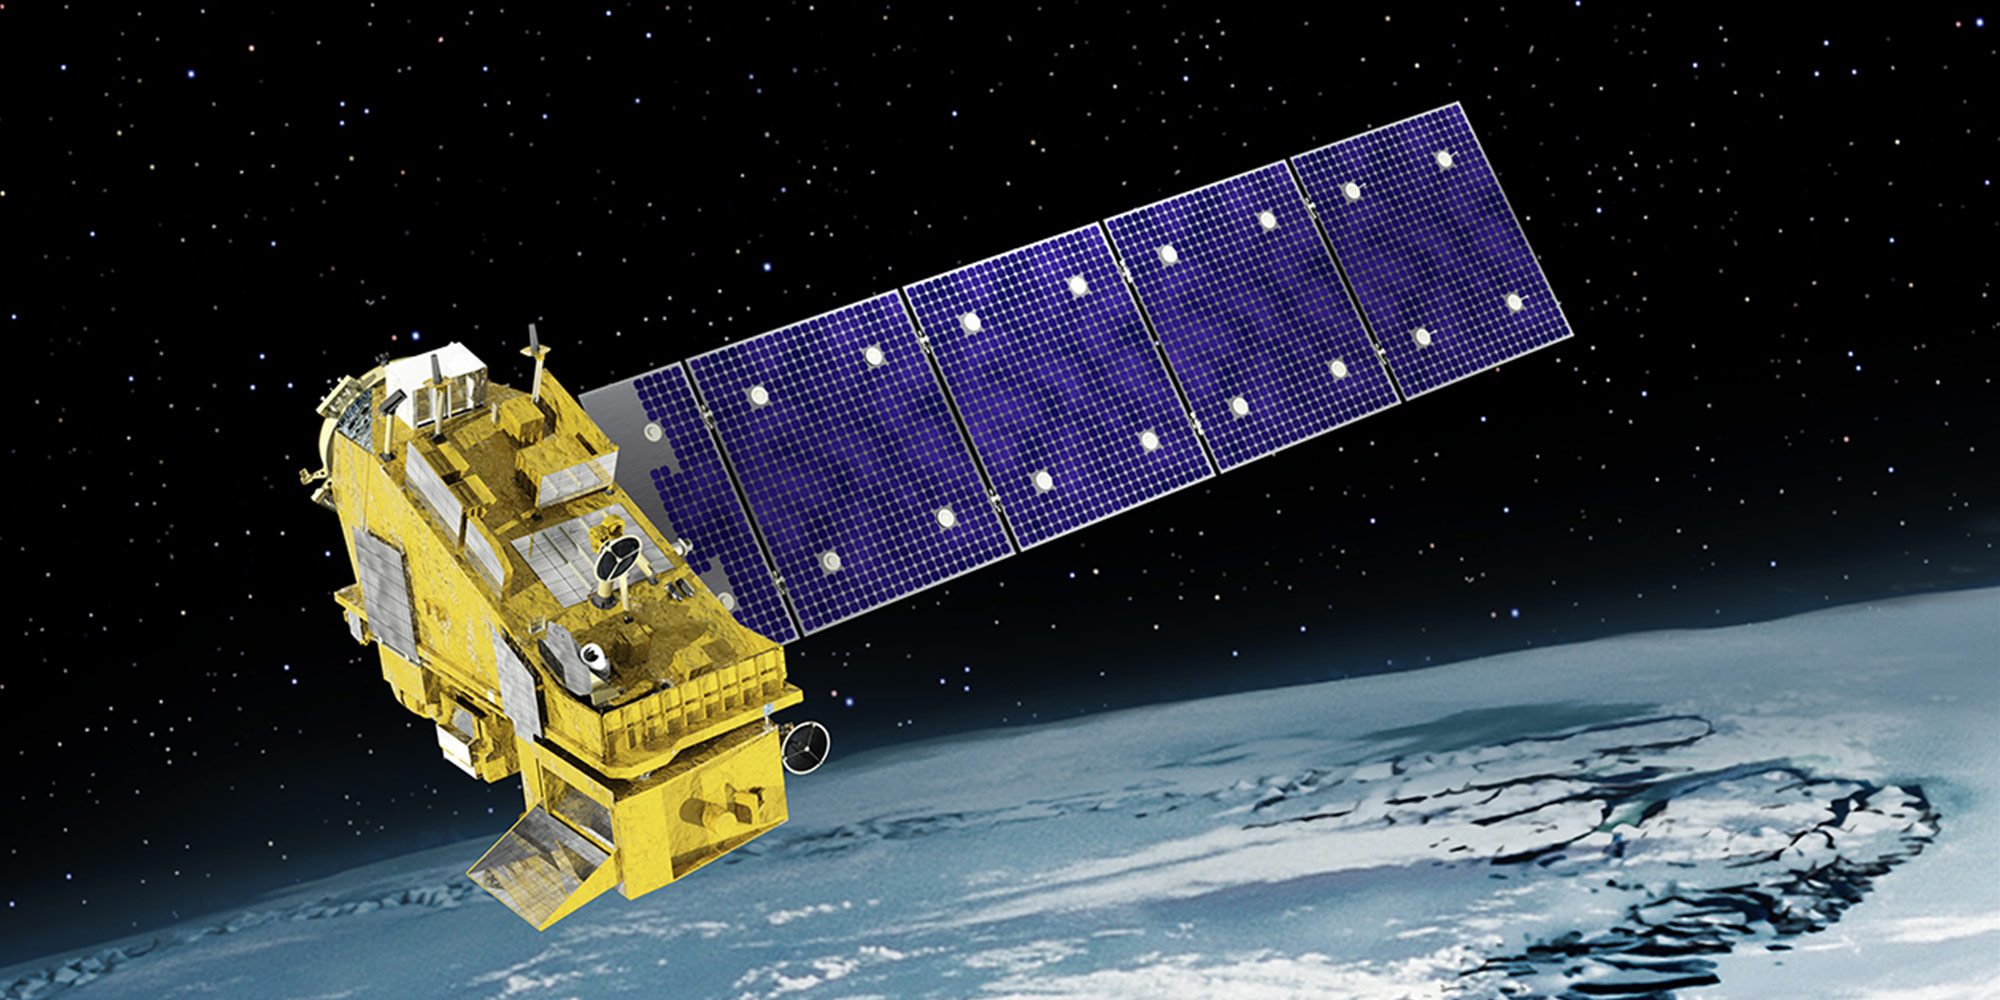 Joint Polar Satellite System above earth